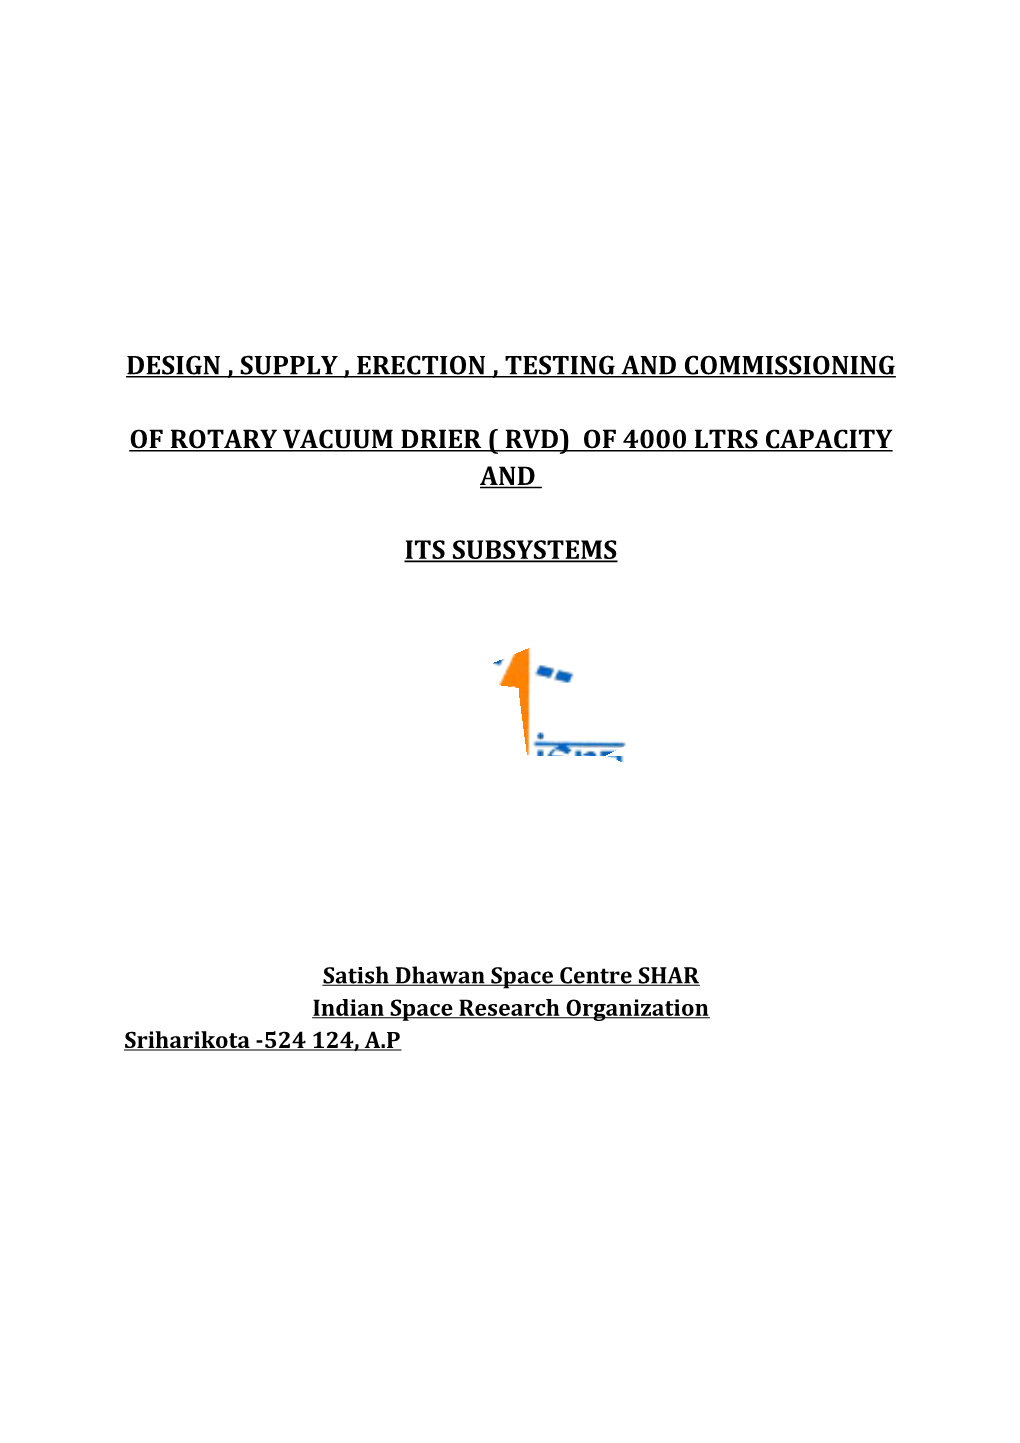 Design, Supply, Erection, Testing and Commissioning of Rotary Vacuum Drier and Its Subsystems